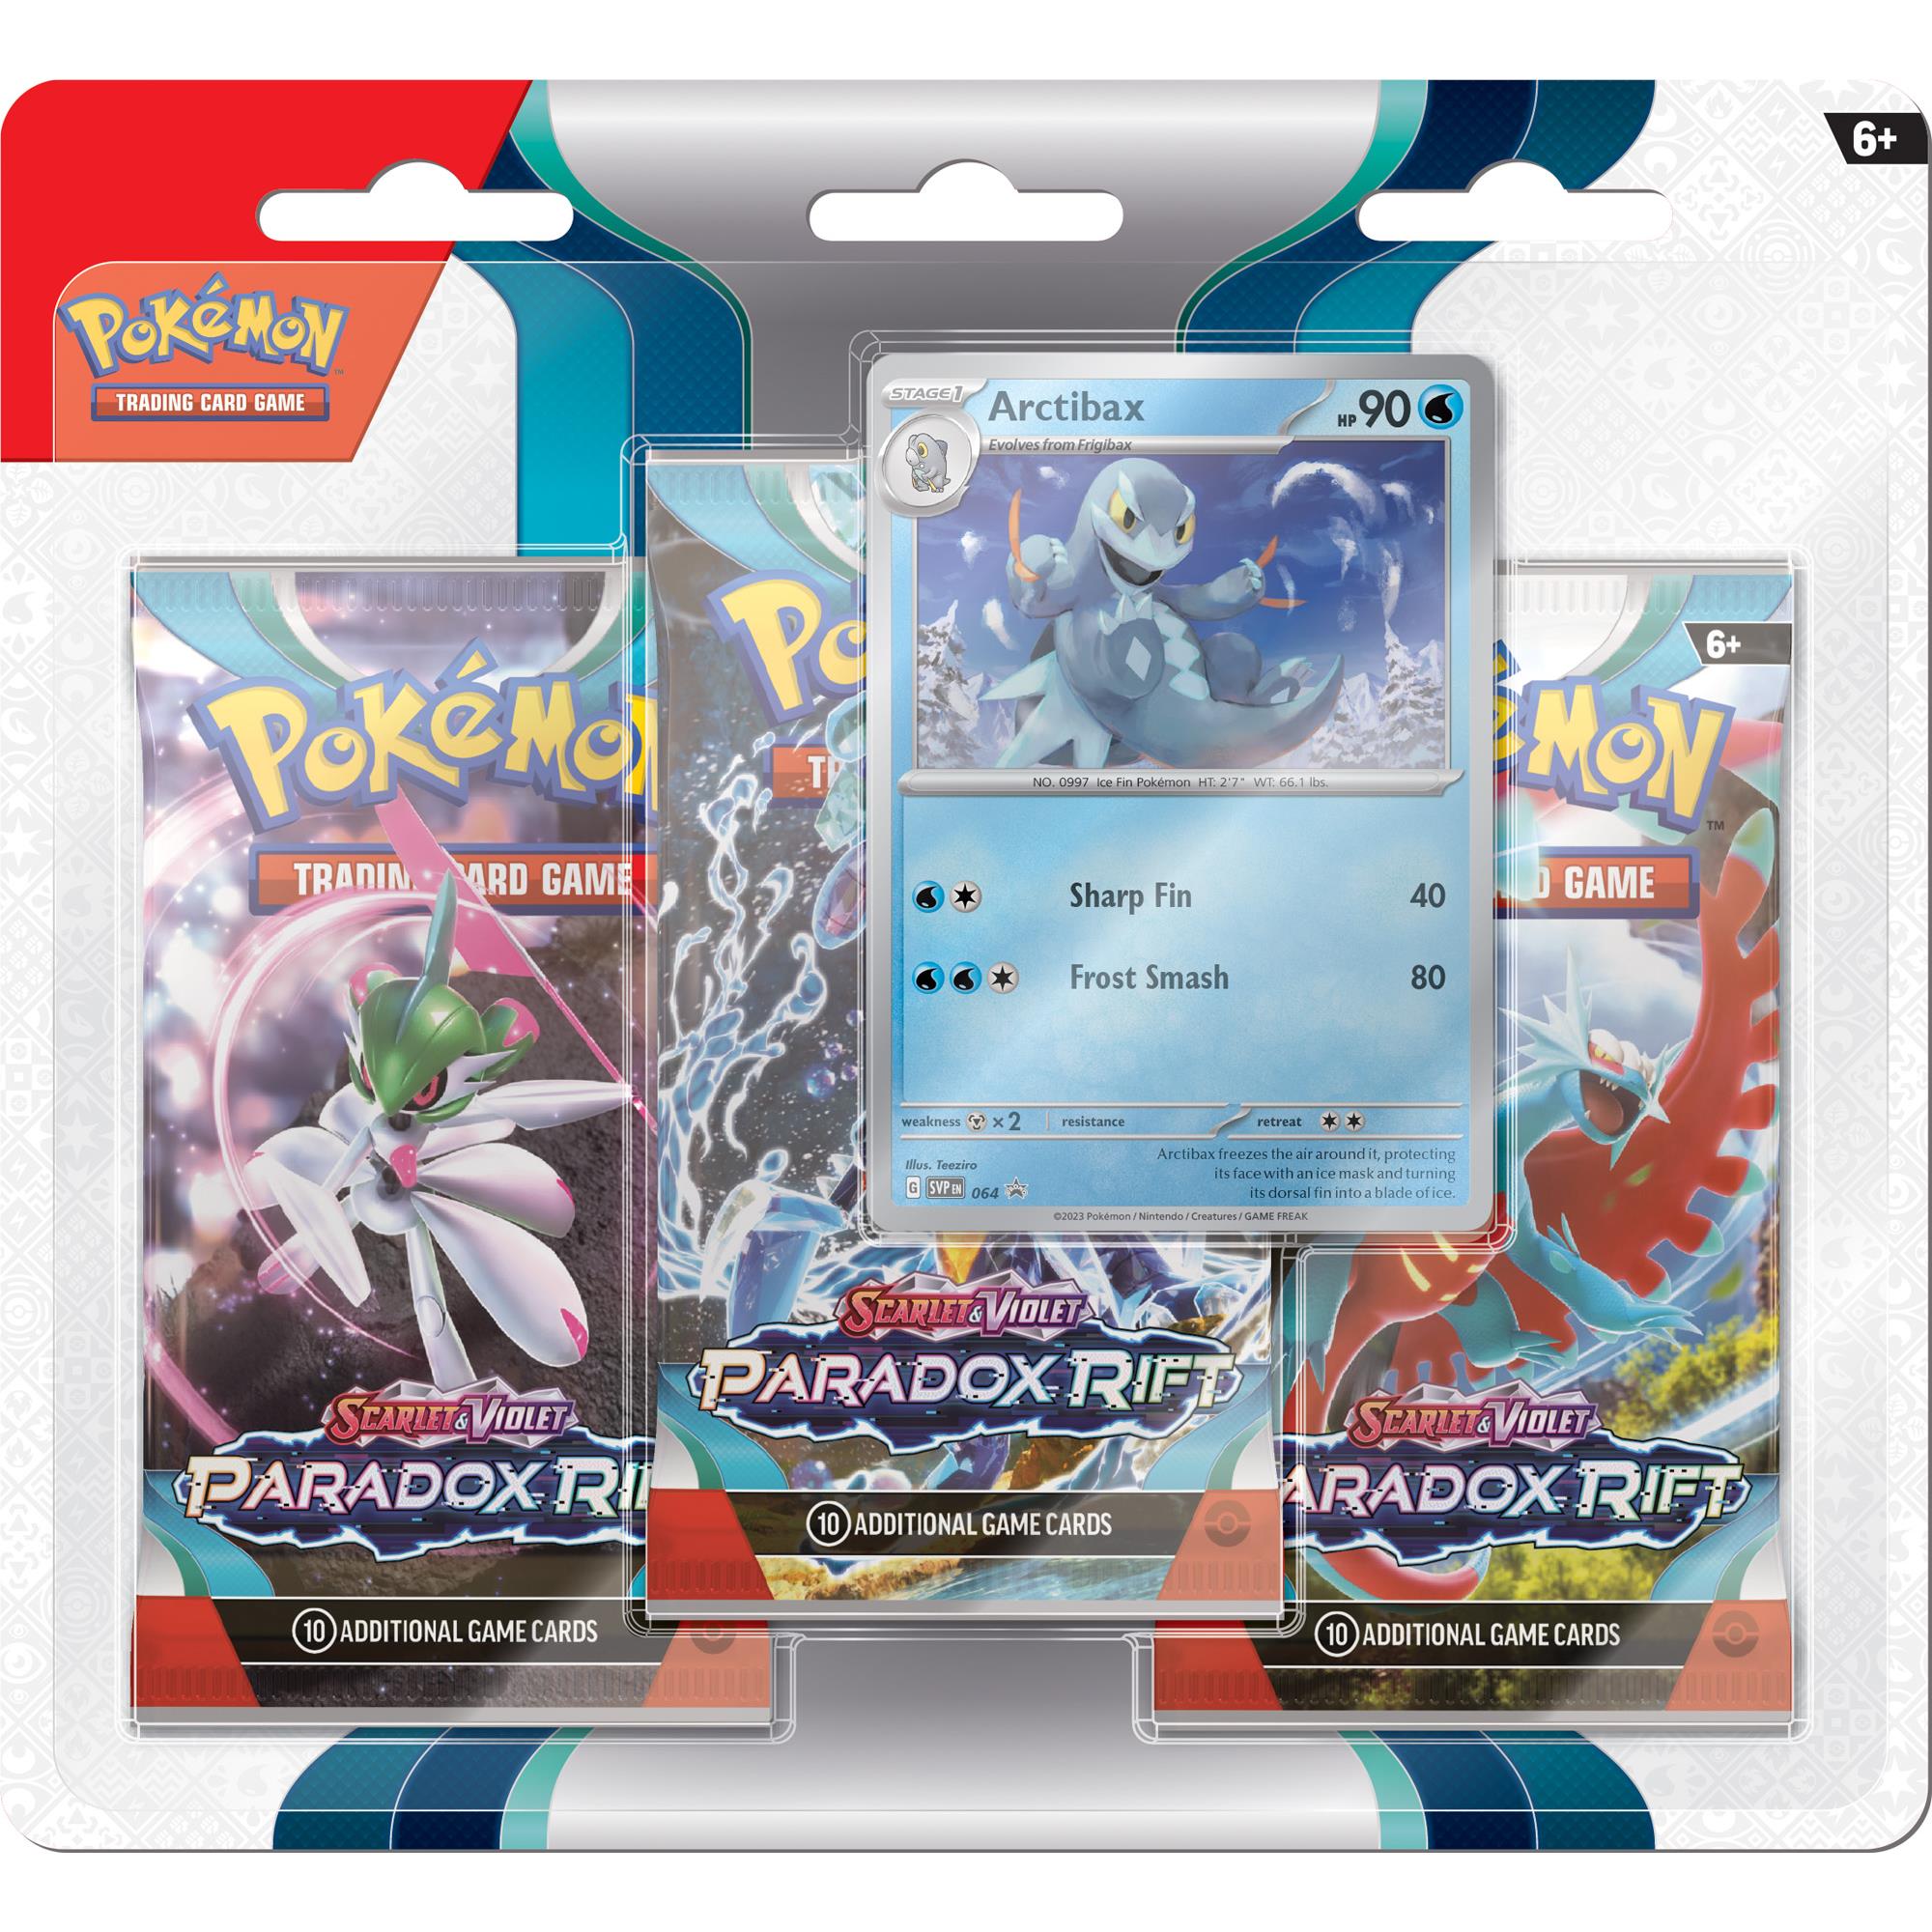 pokemon trading card game - scarlet & violet: paradox rift three booster blister